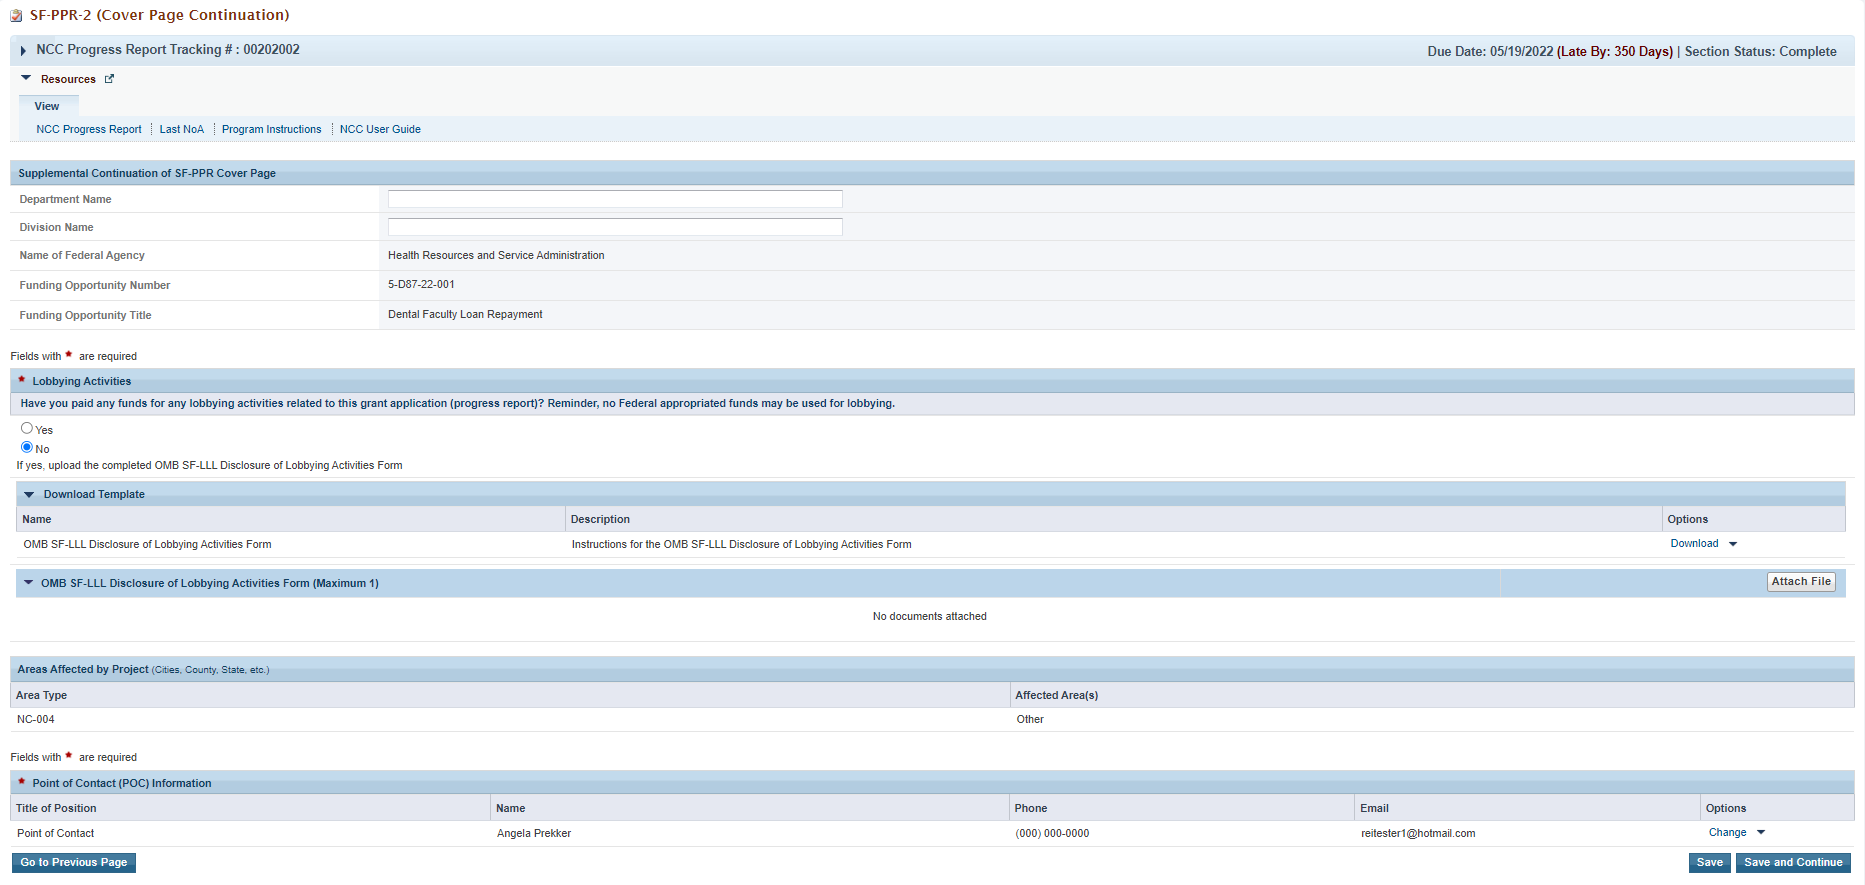 Screenshot of SF PPR Confirmation page